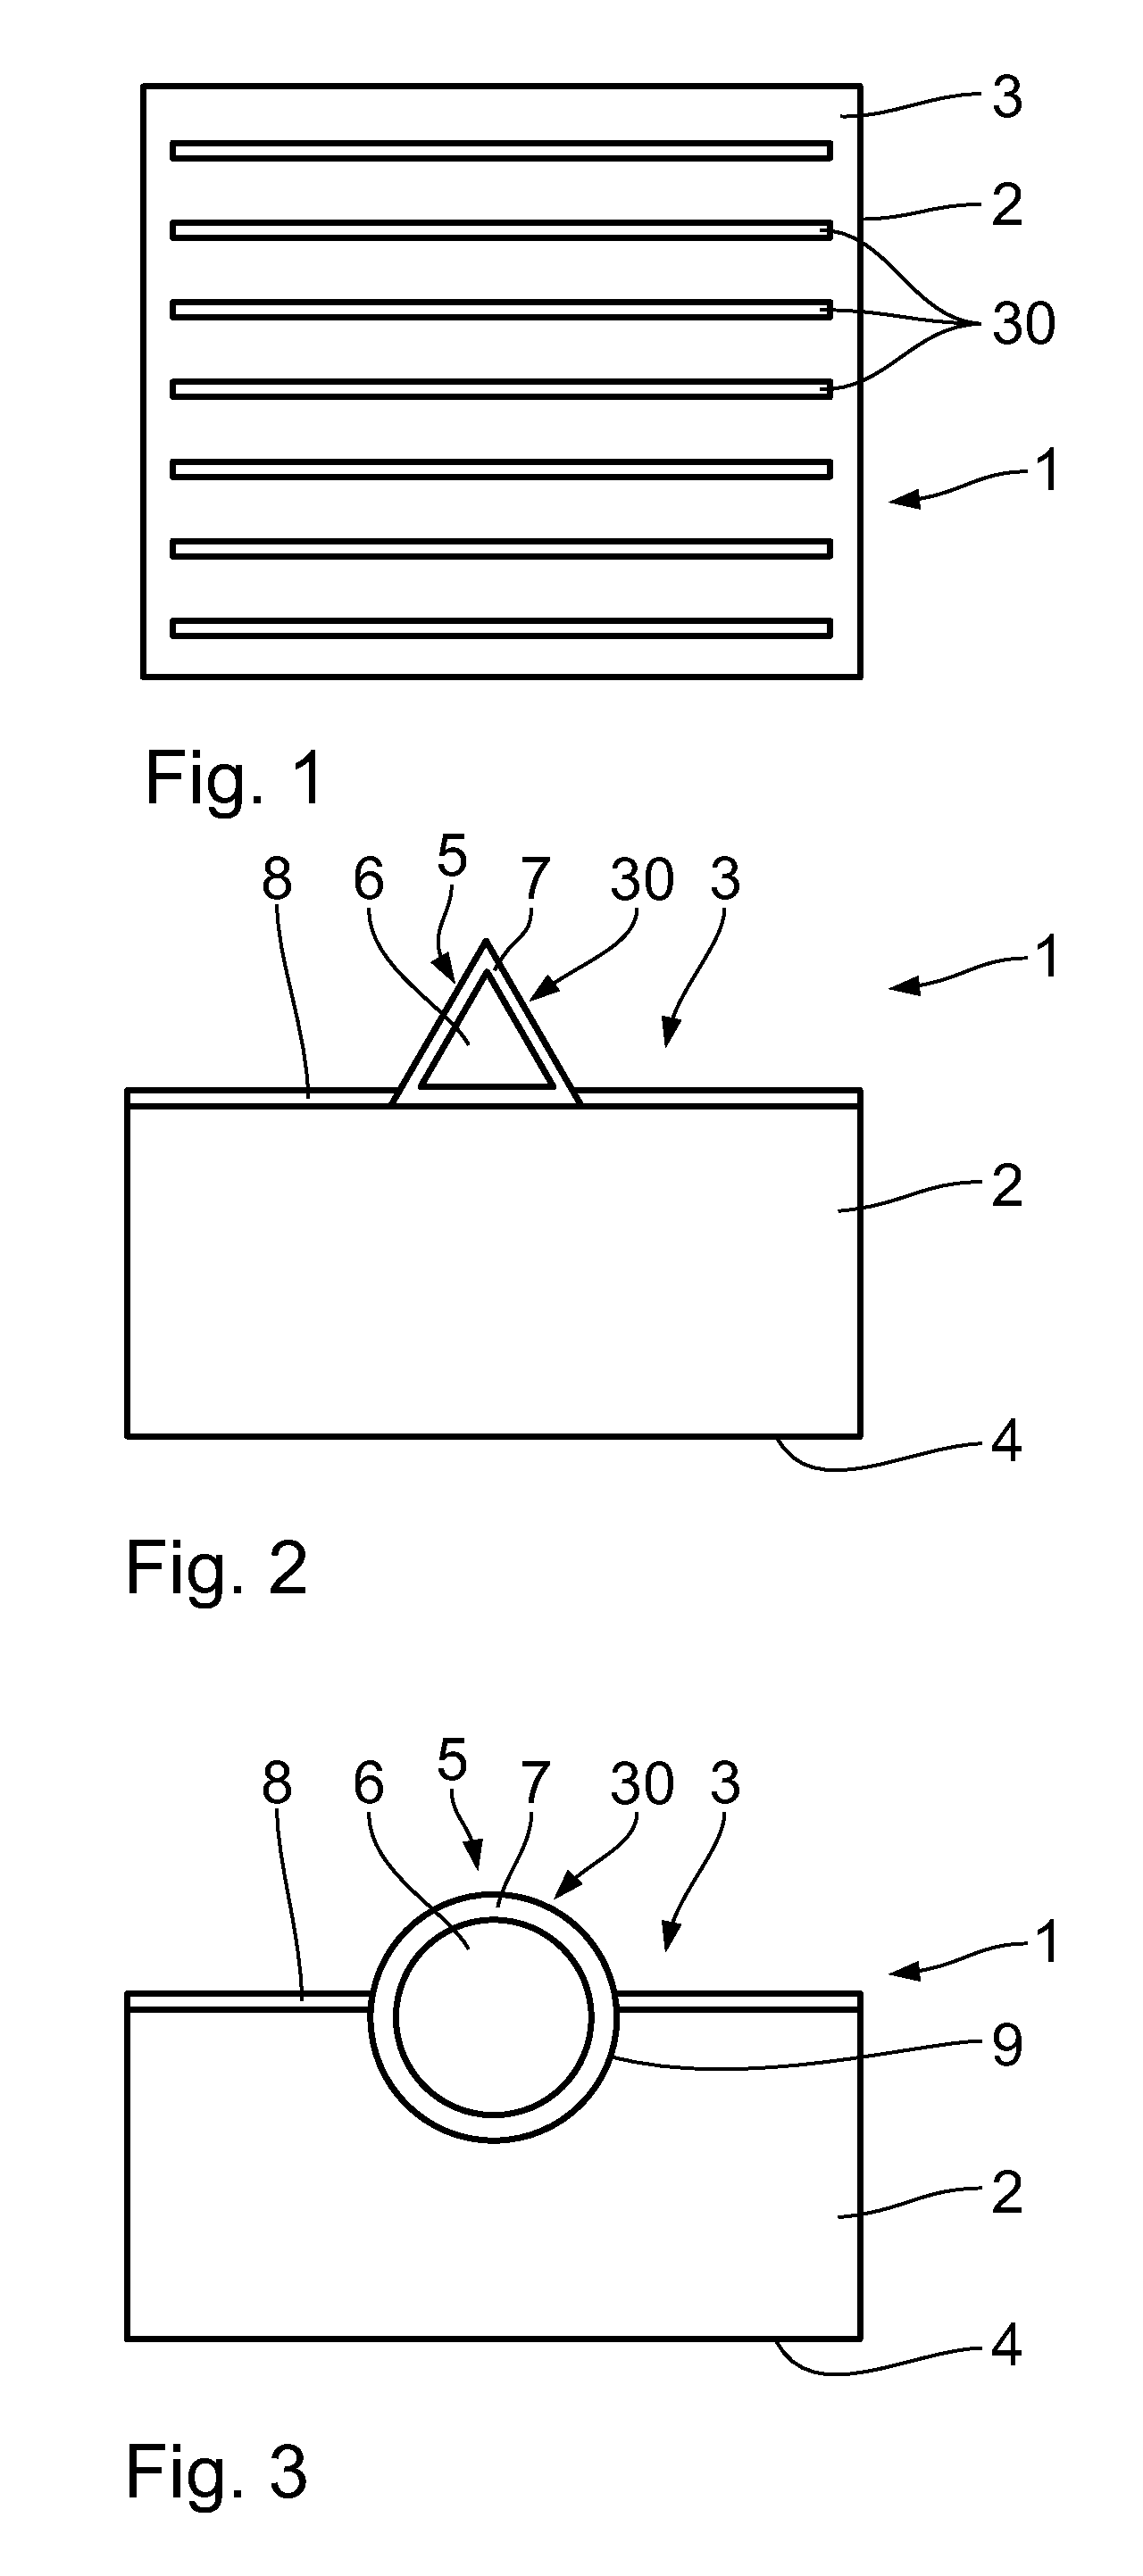 Semiconductor component with contacts made of alloyed-in metal wires